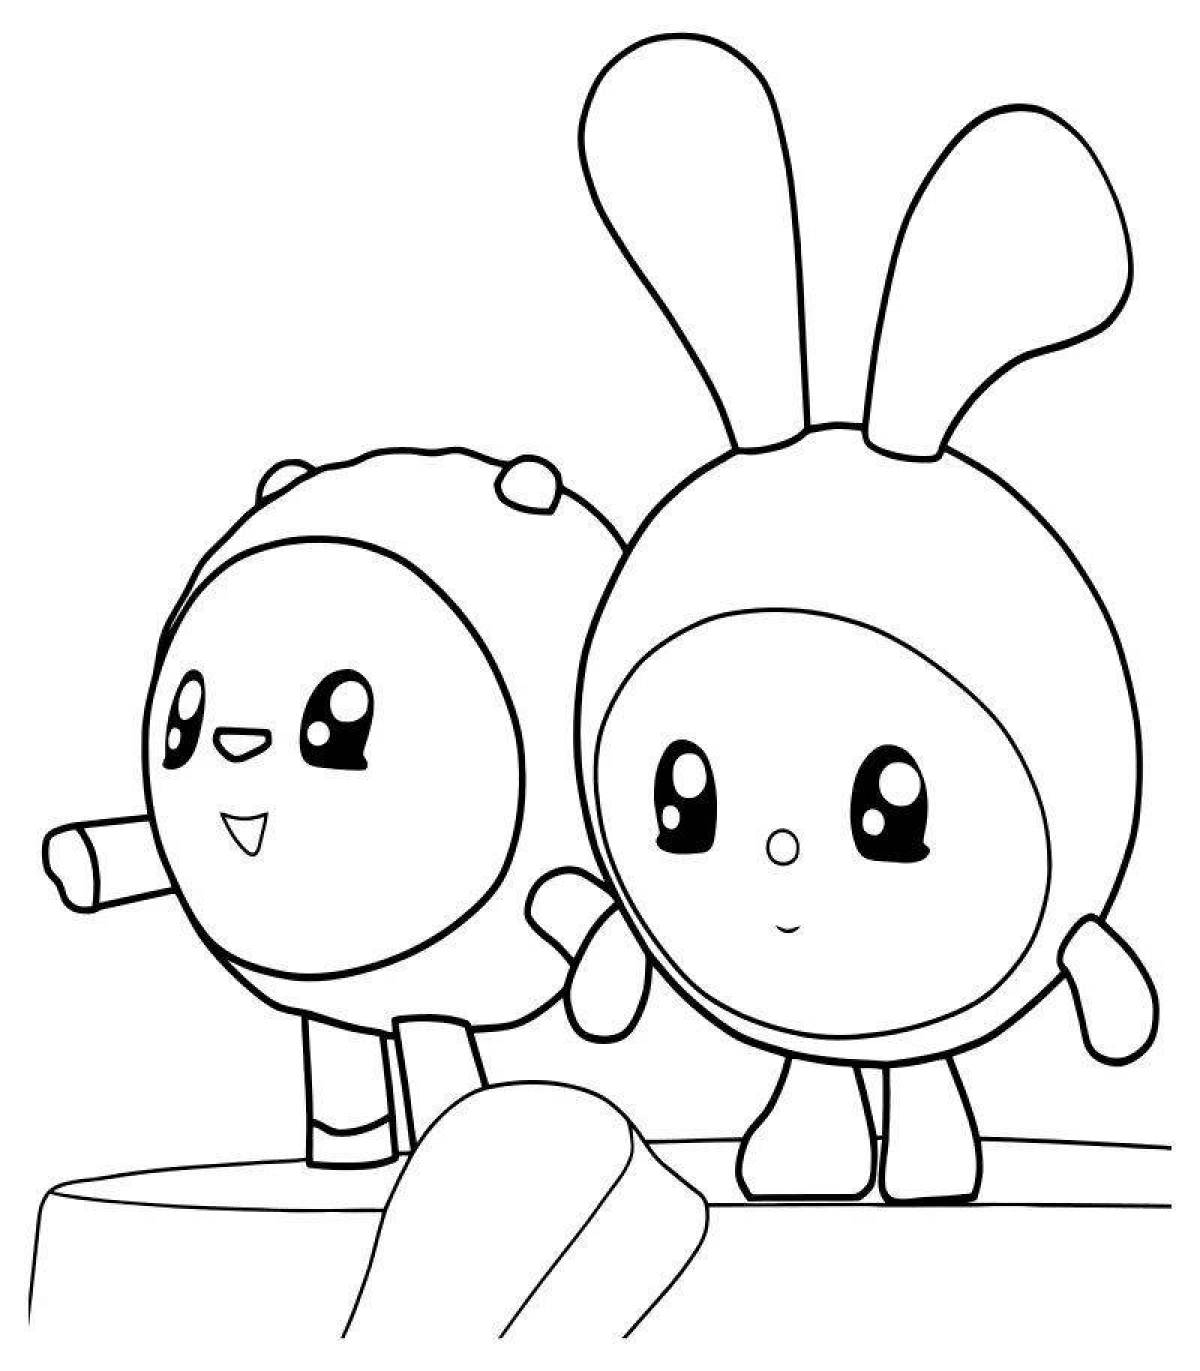 Snug coloring pages